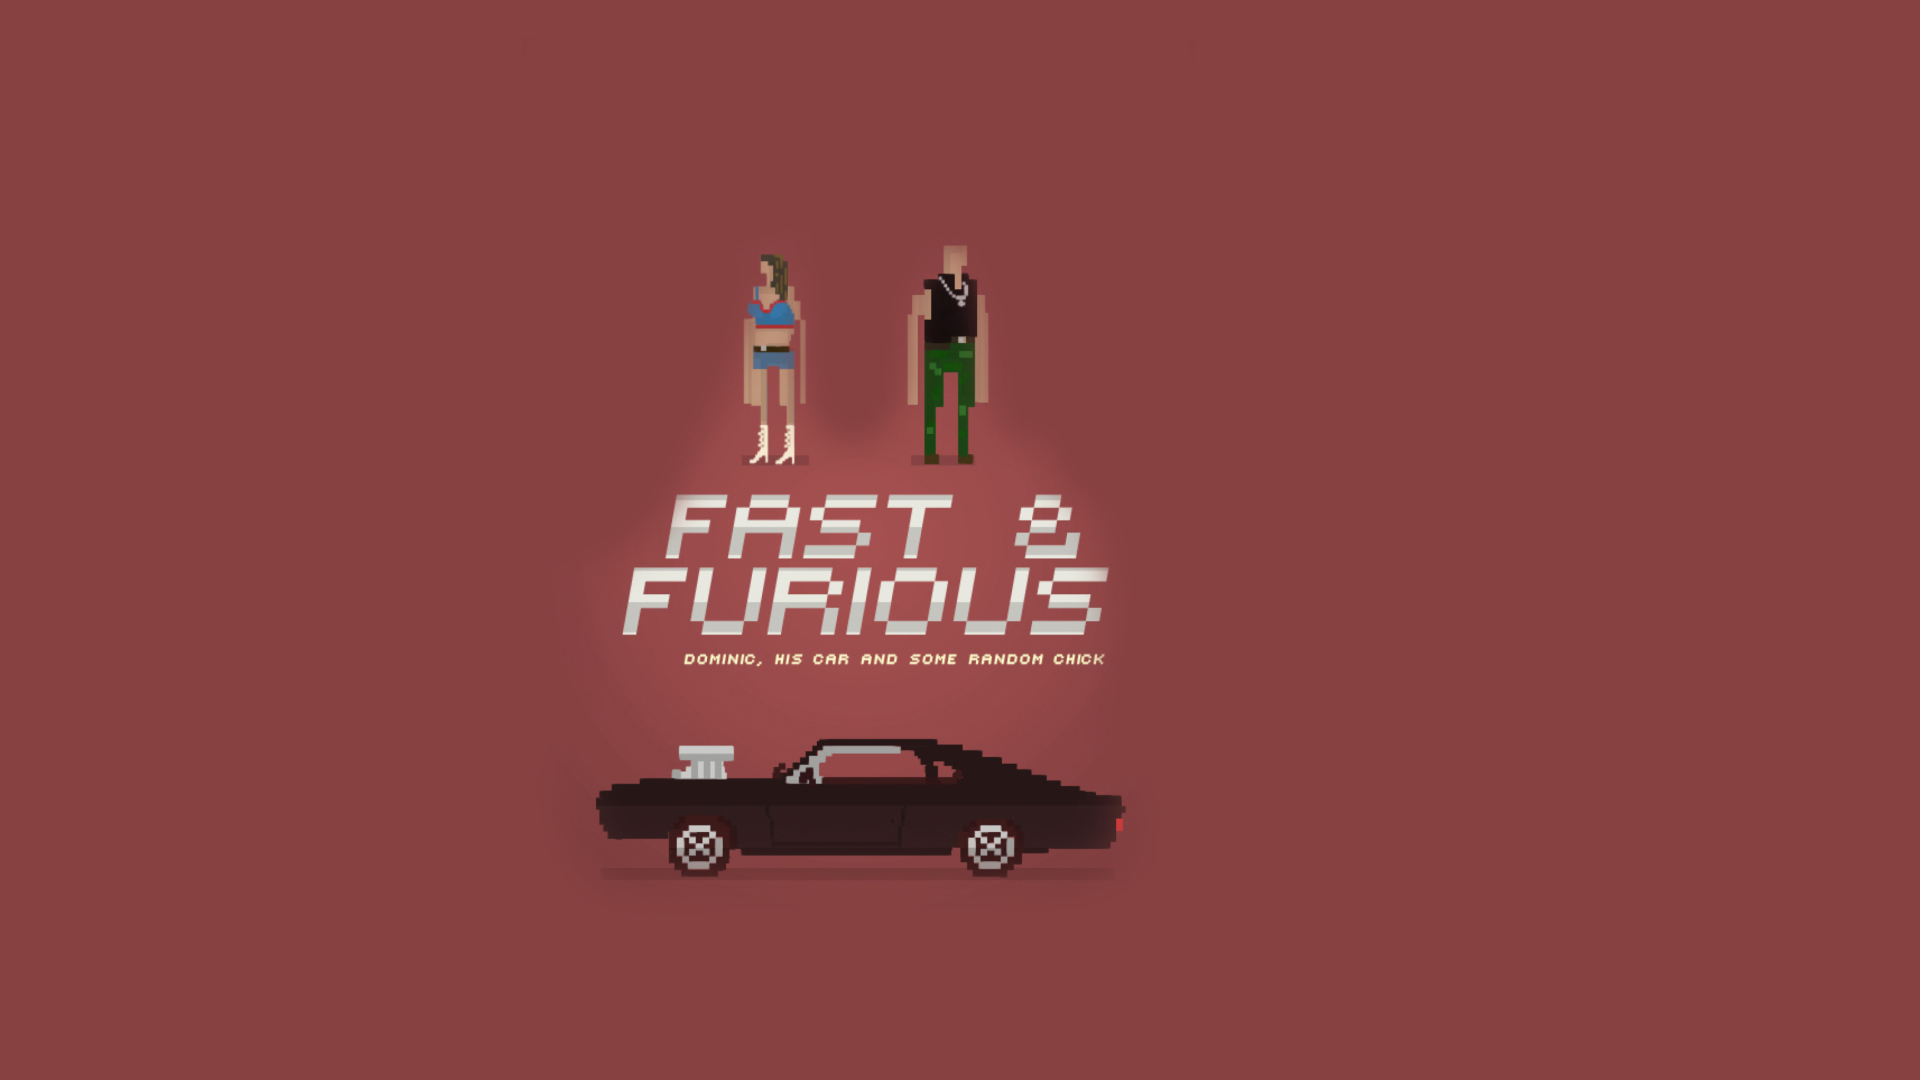 Fast And Furious wallpaper 1920x1080